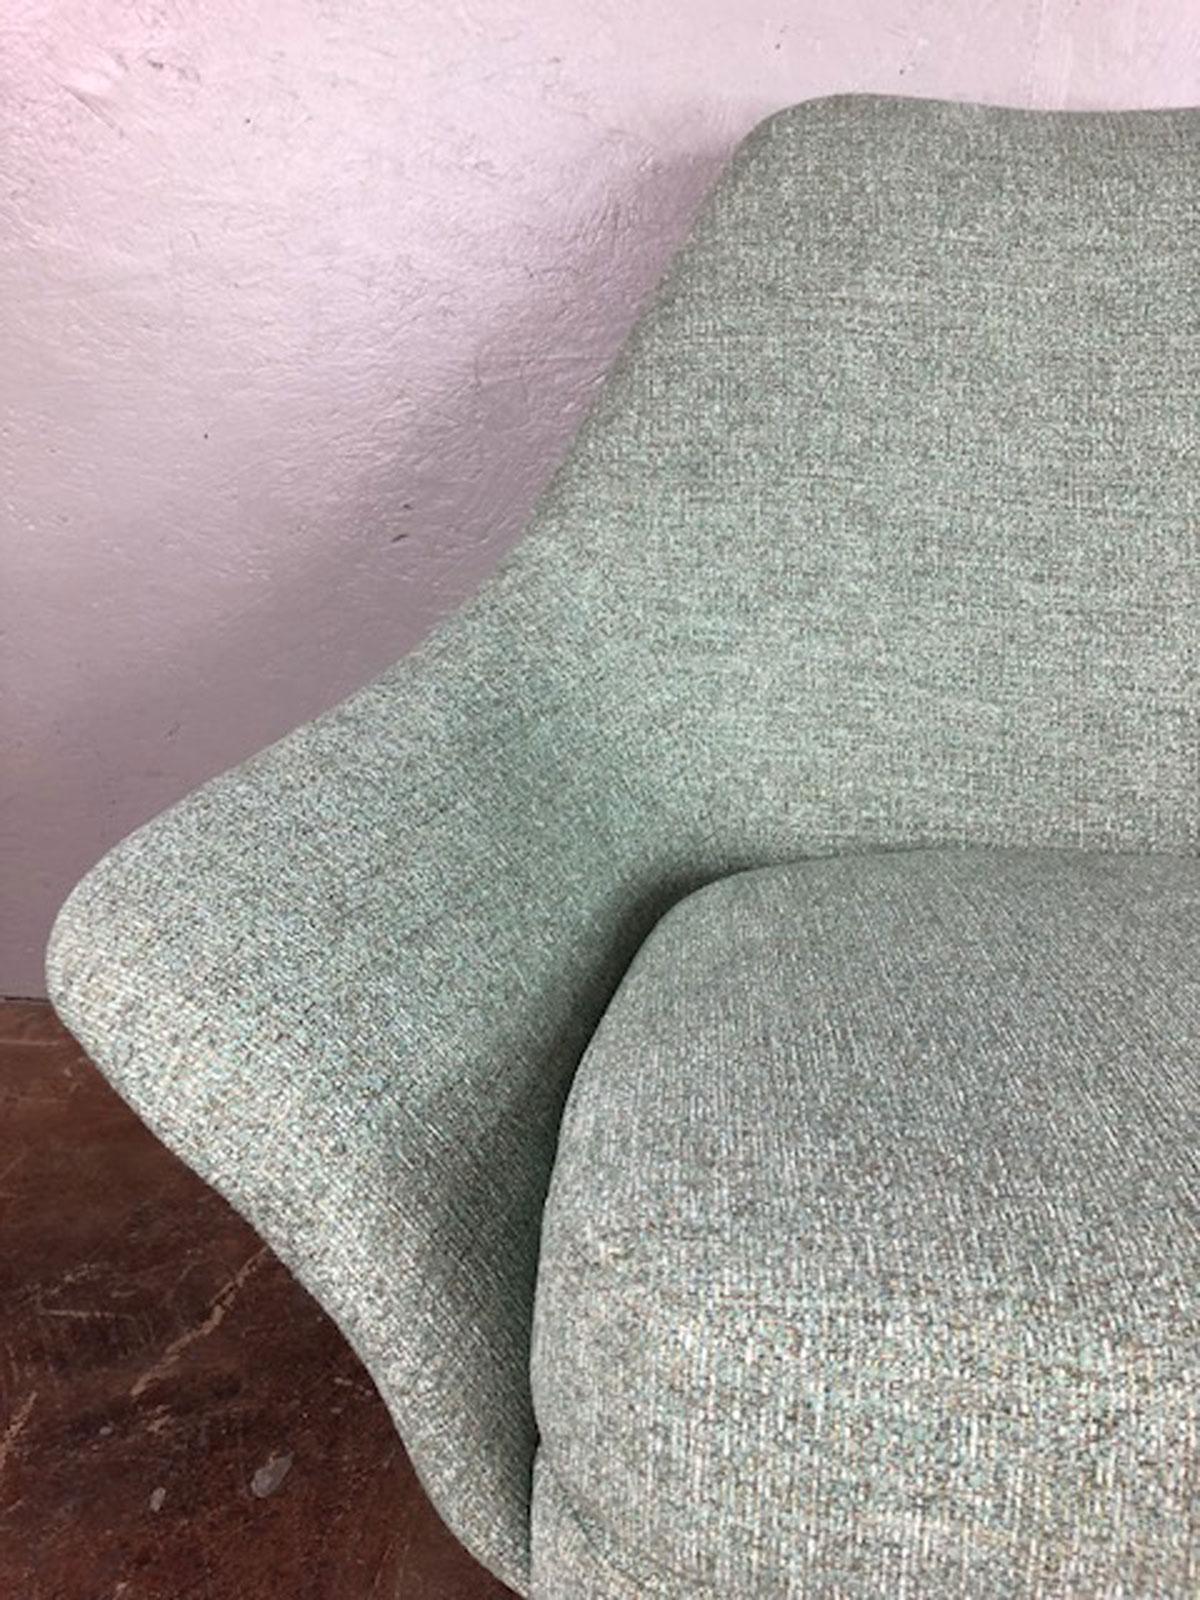 Newly upholstered Viko lounge chair by Baumritter. Soft green, gray, and neutral tones. Superb California made fabric. Easy cleaning, long wearing fabric, circa 1960s.